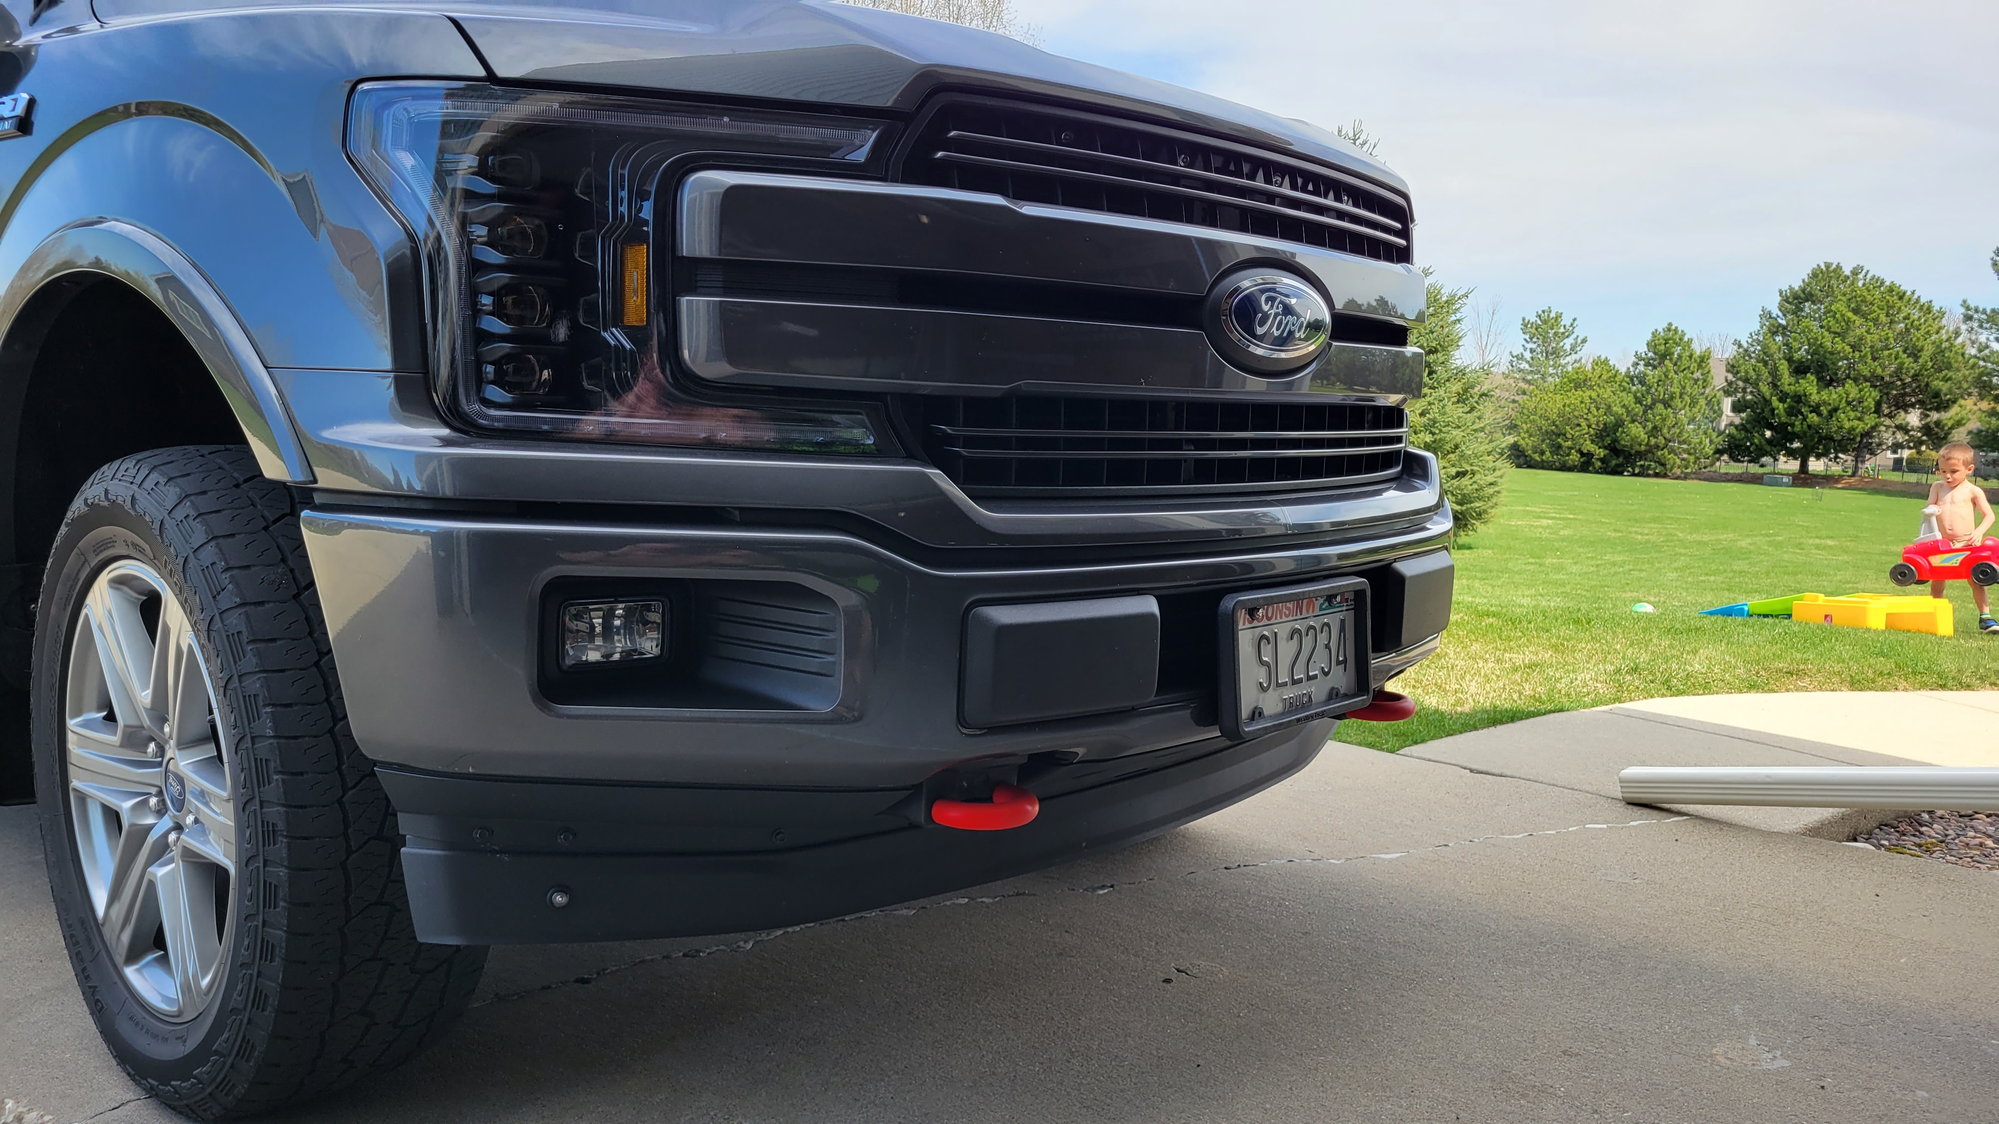 Front tow hooks on 2wd - Ford F150 Forum - Community of Ford Truck